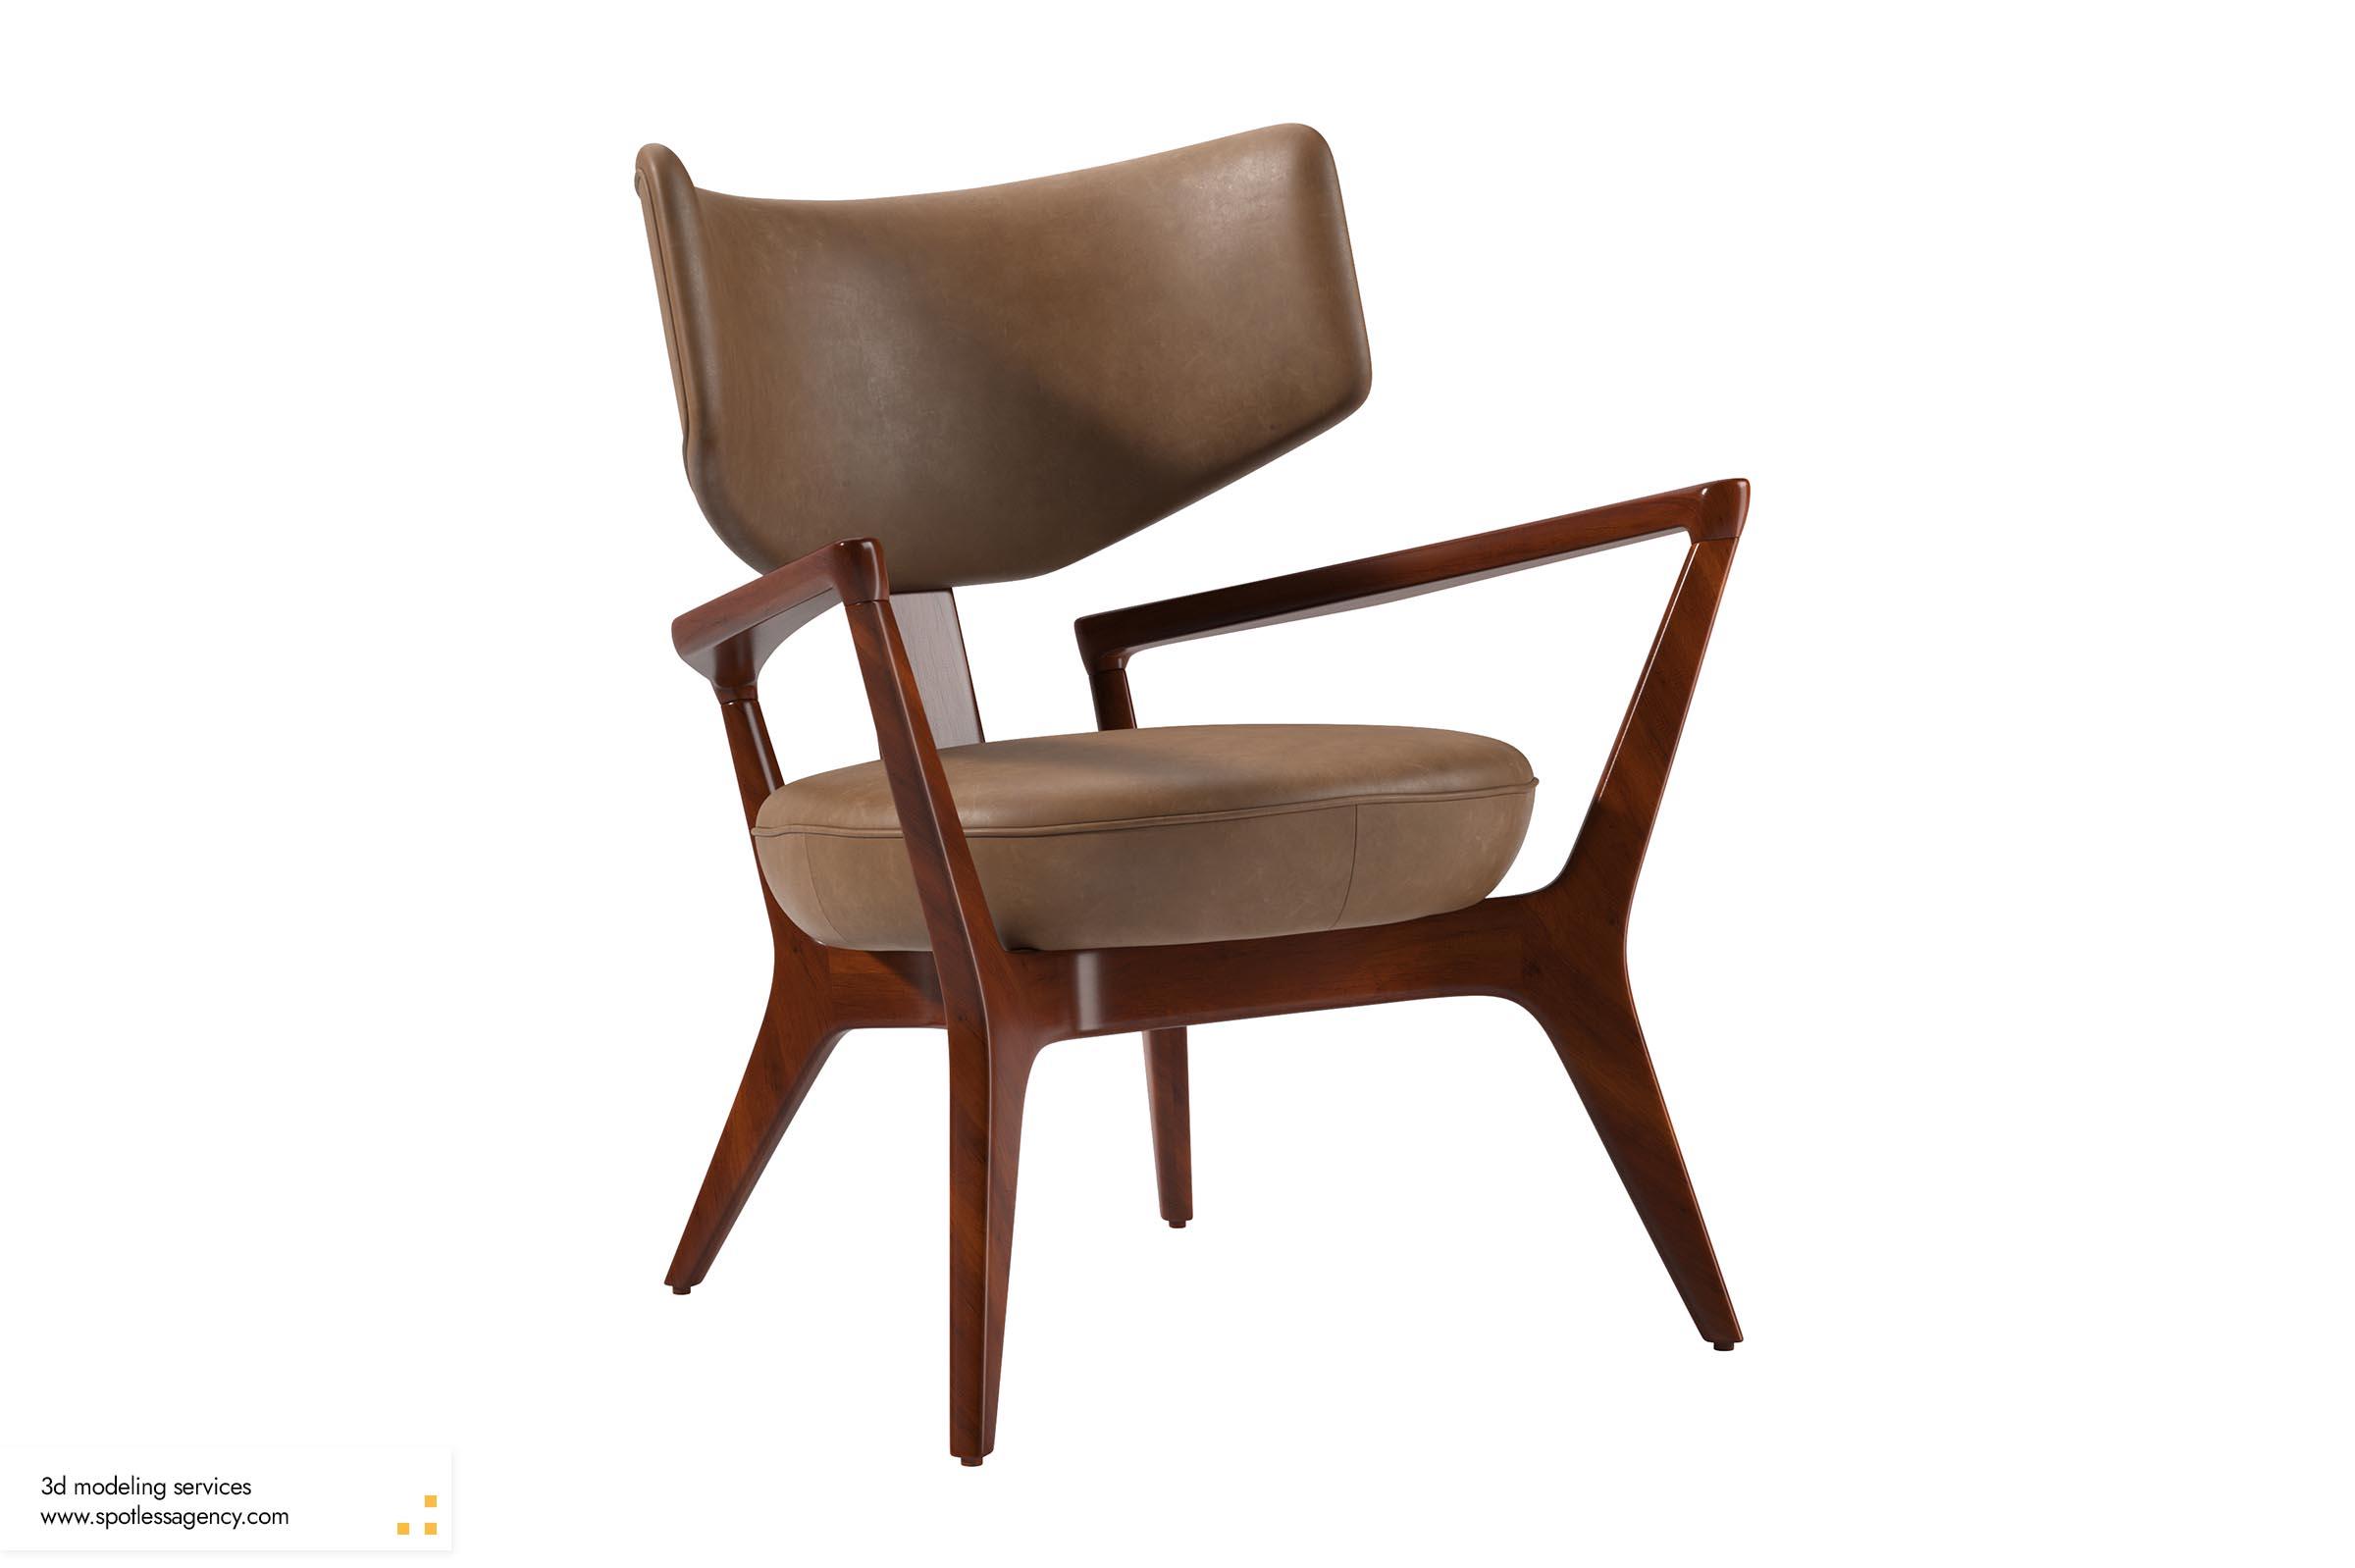 Chairs part 2 - 3d Modeling Services